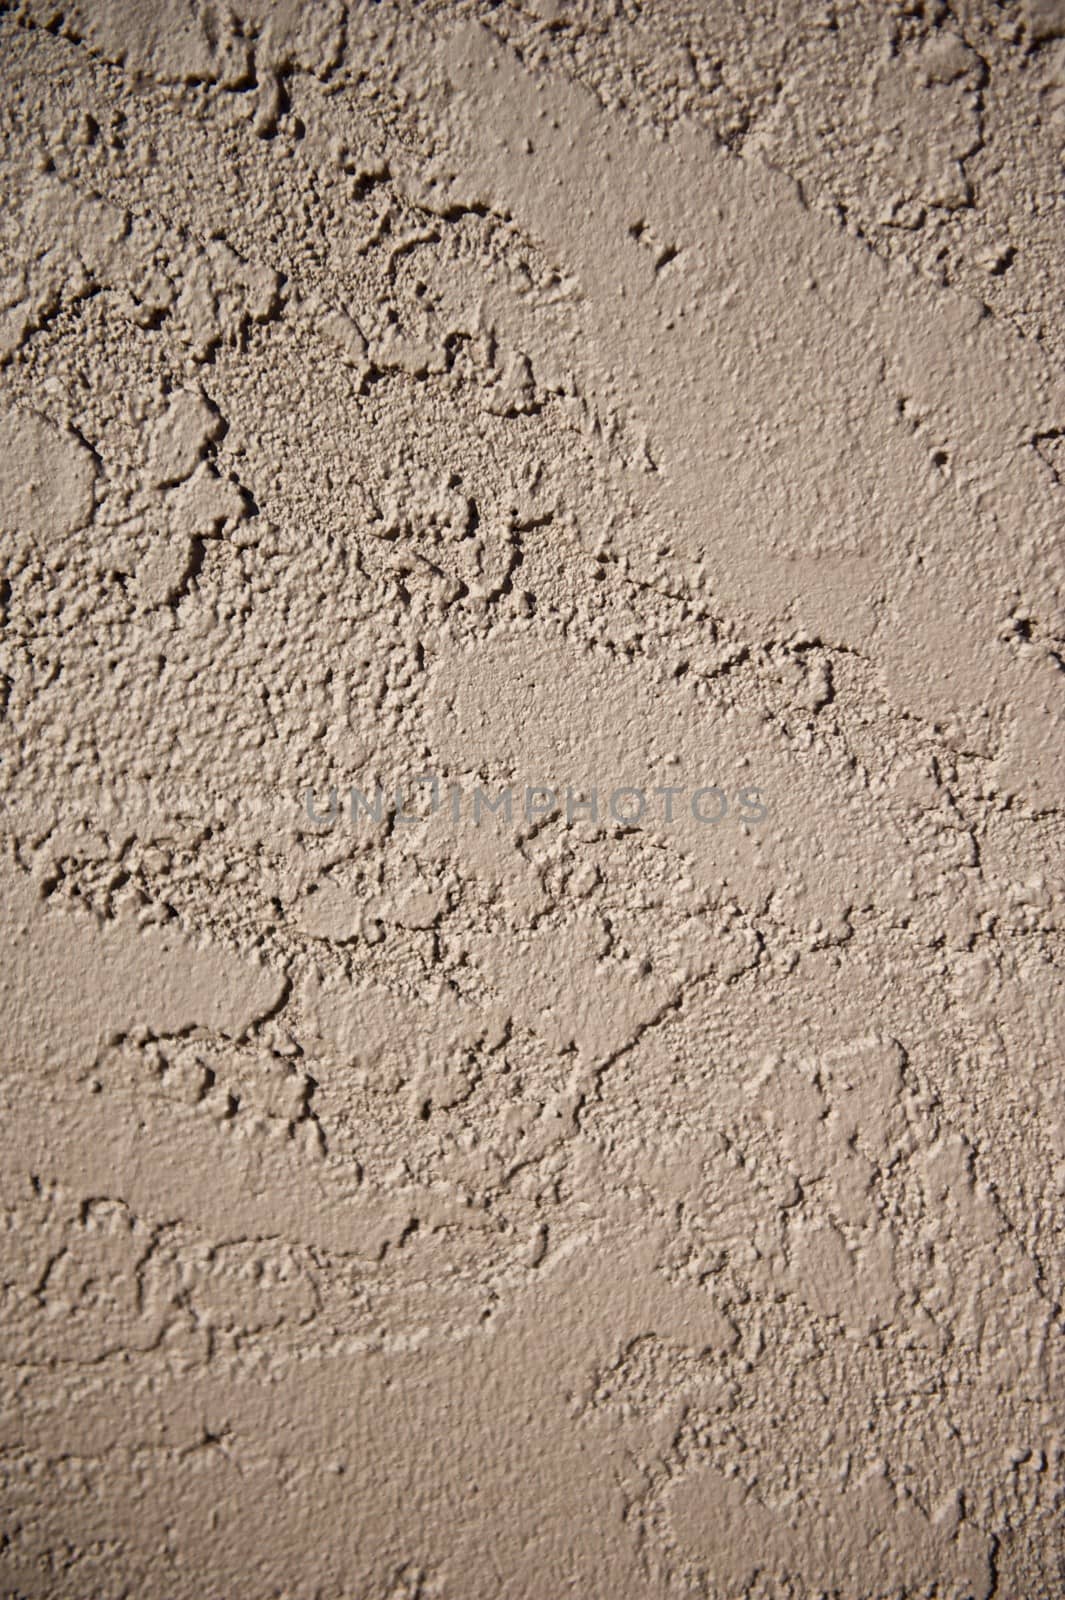 Wall of a home constructed with a brown stucco exterior finish